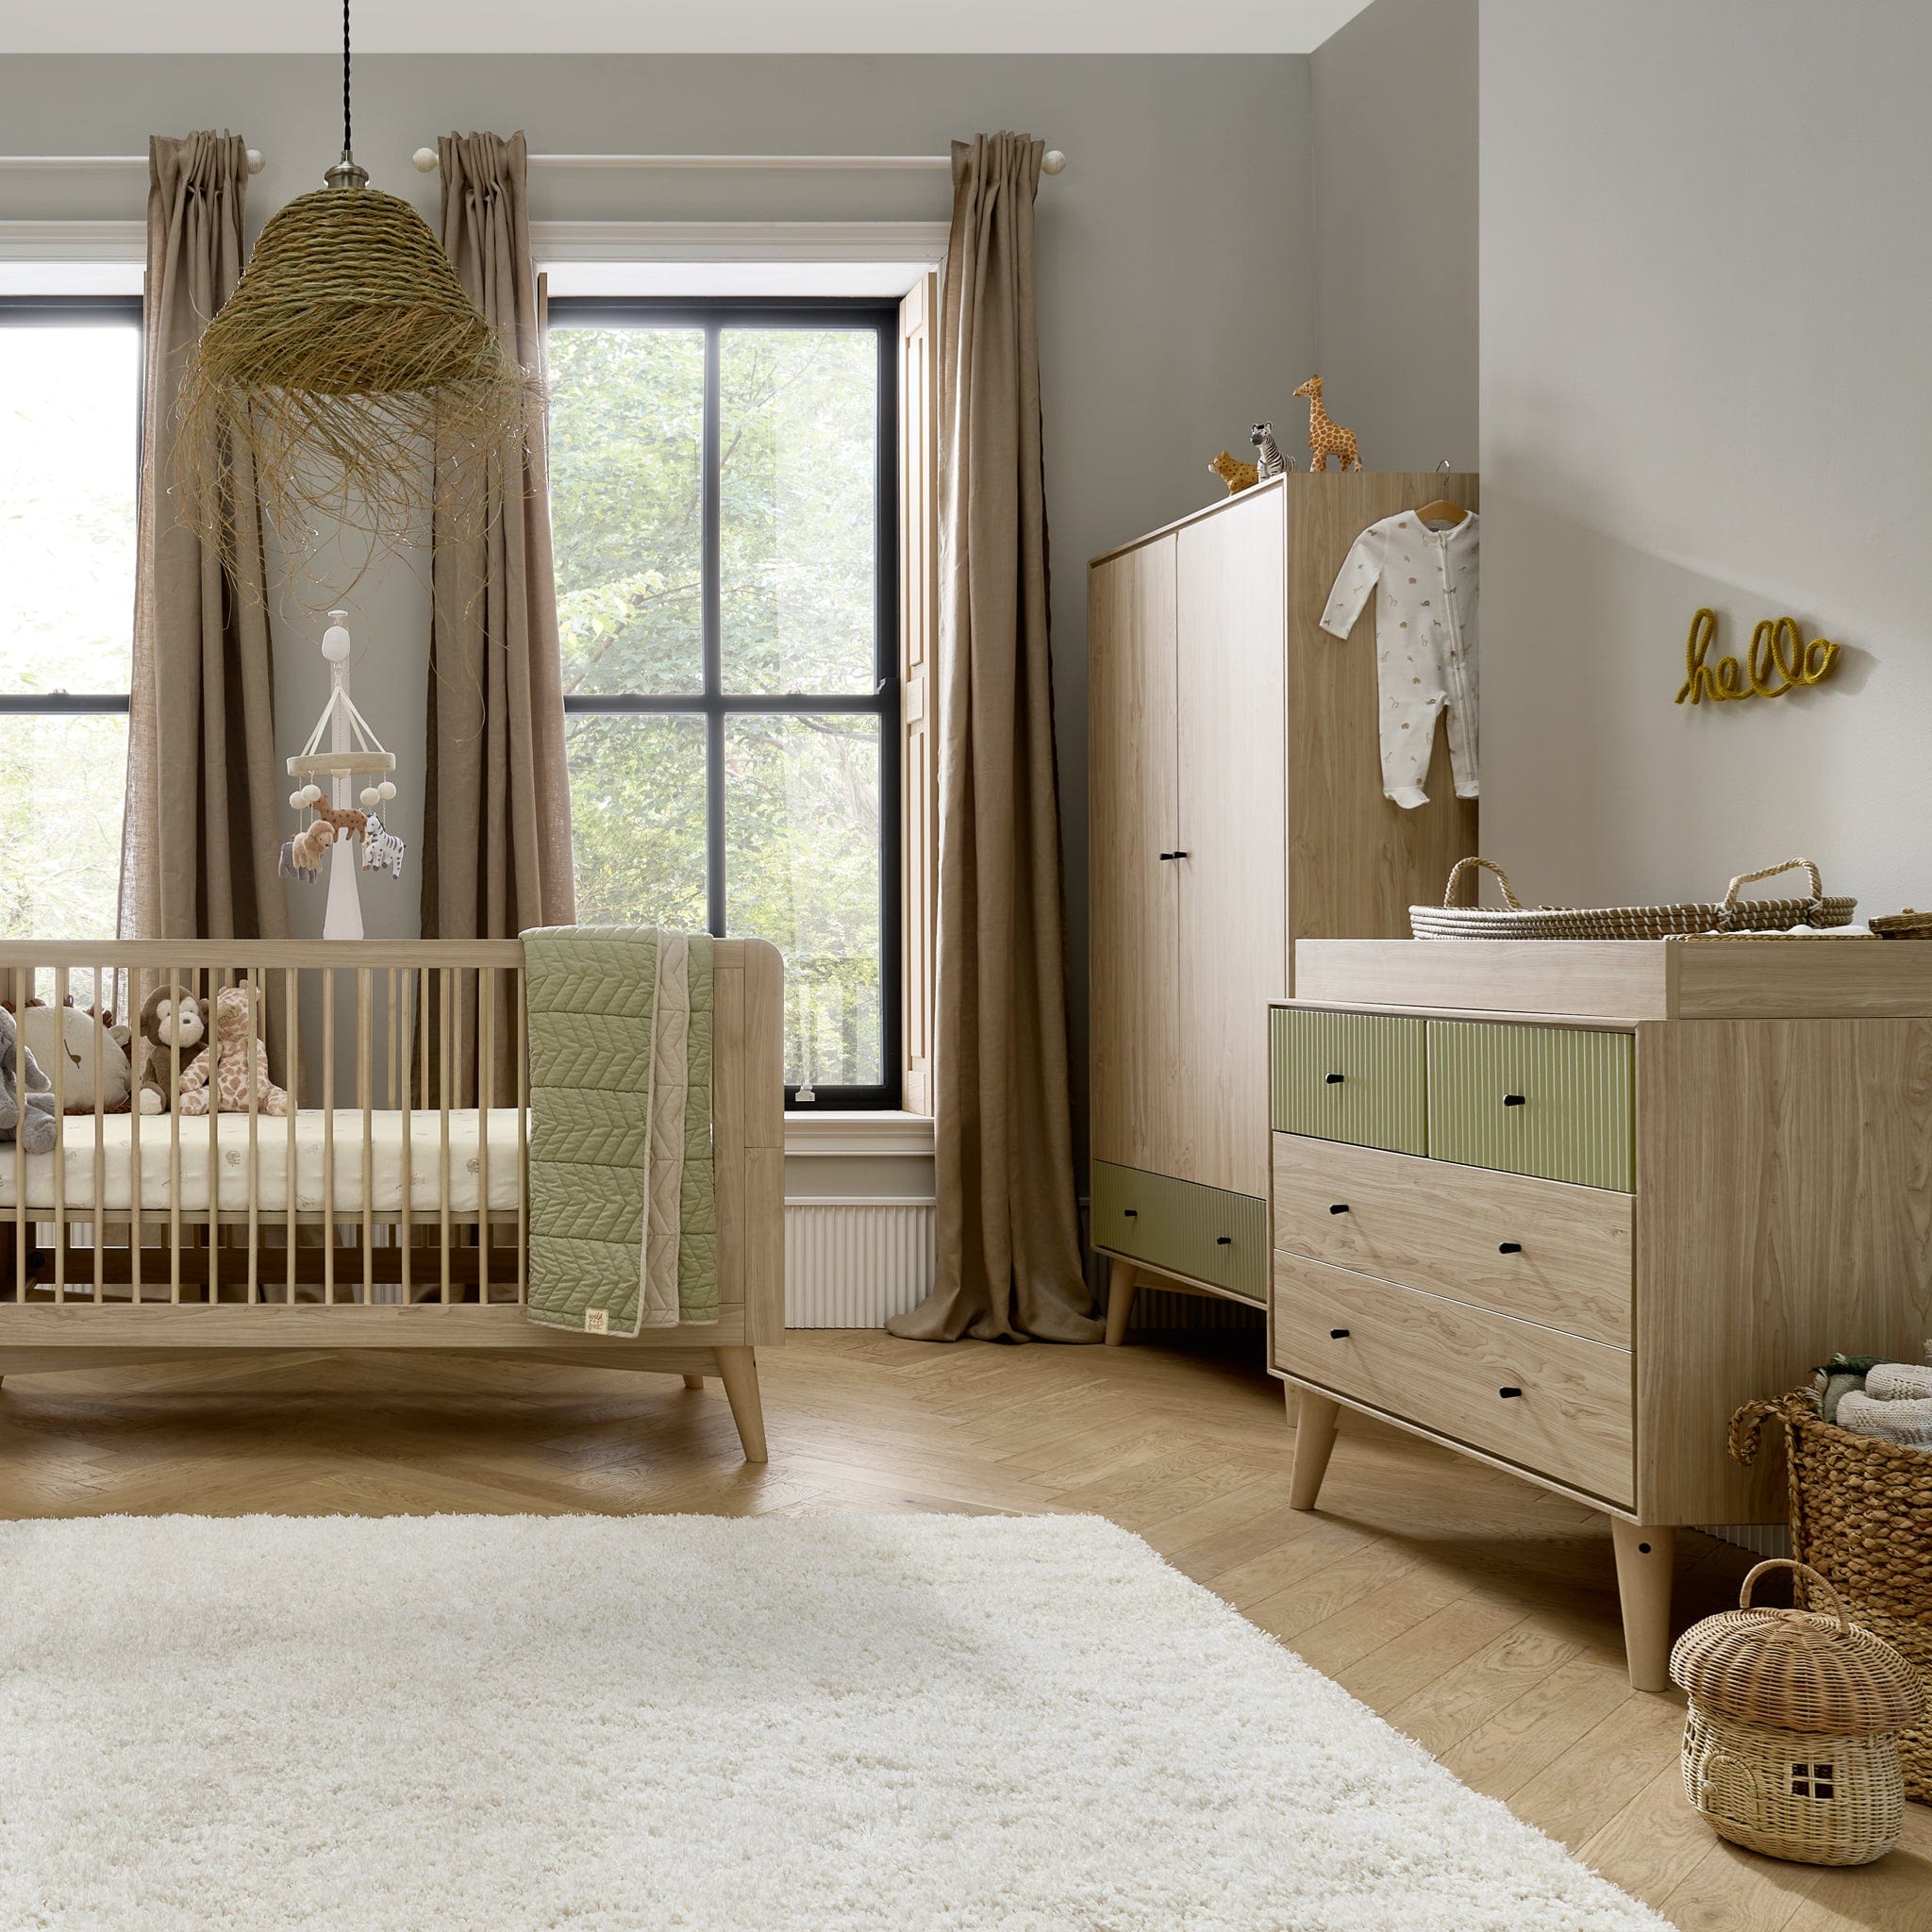 Mamas & Papas Coxley 3 Piece Cotbed Range in Natural/Olive Nursery Room Sets